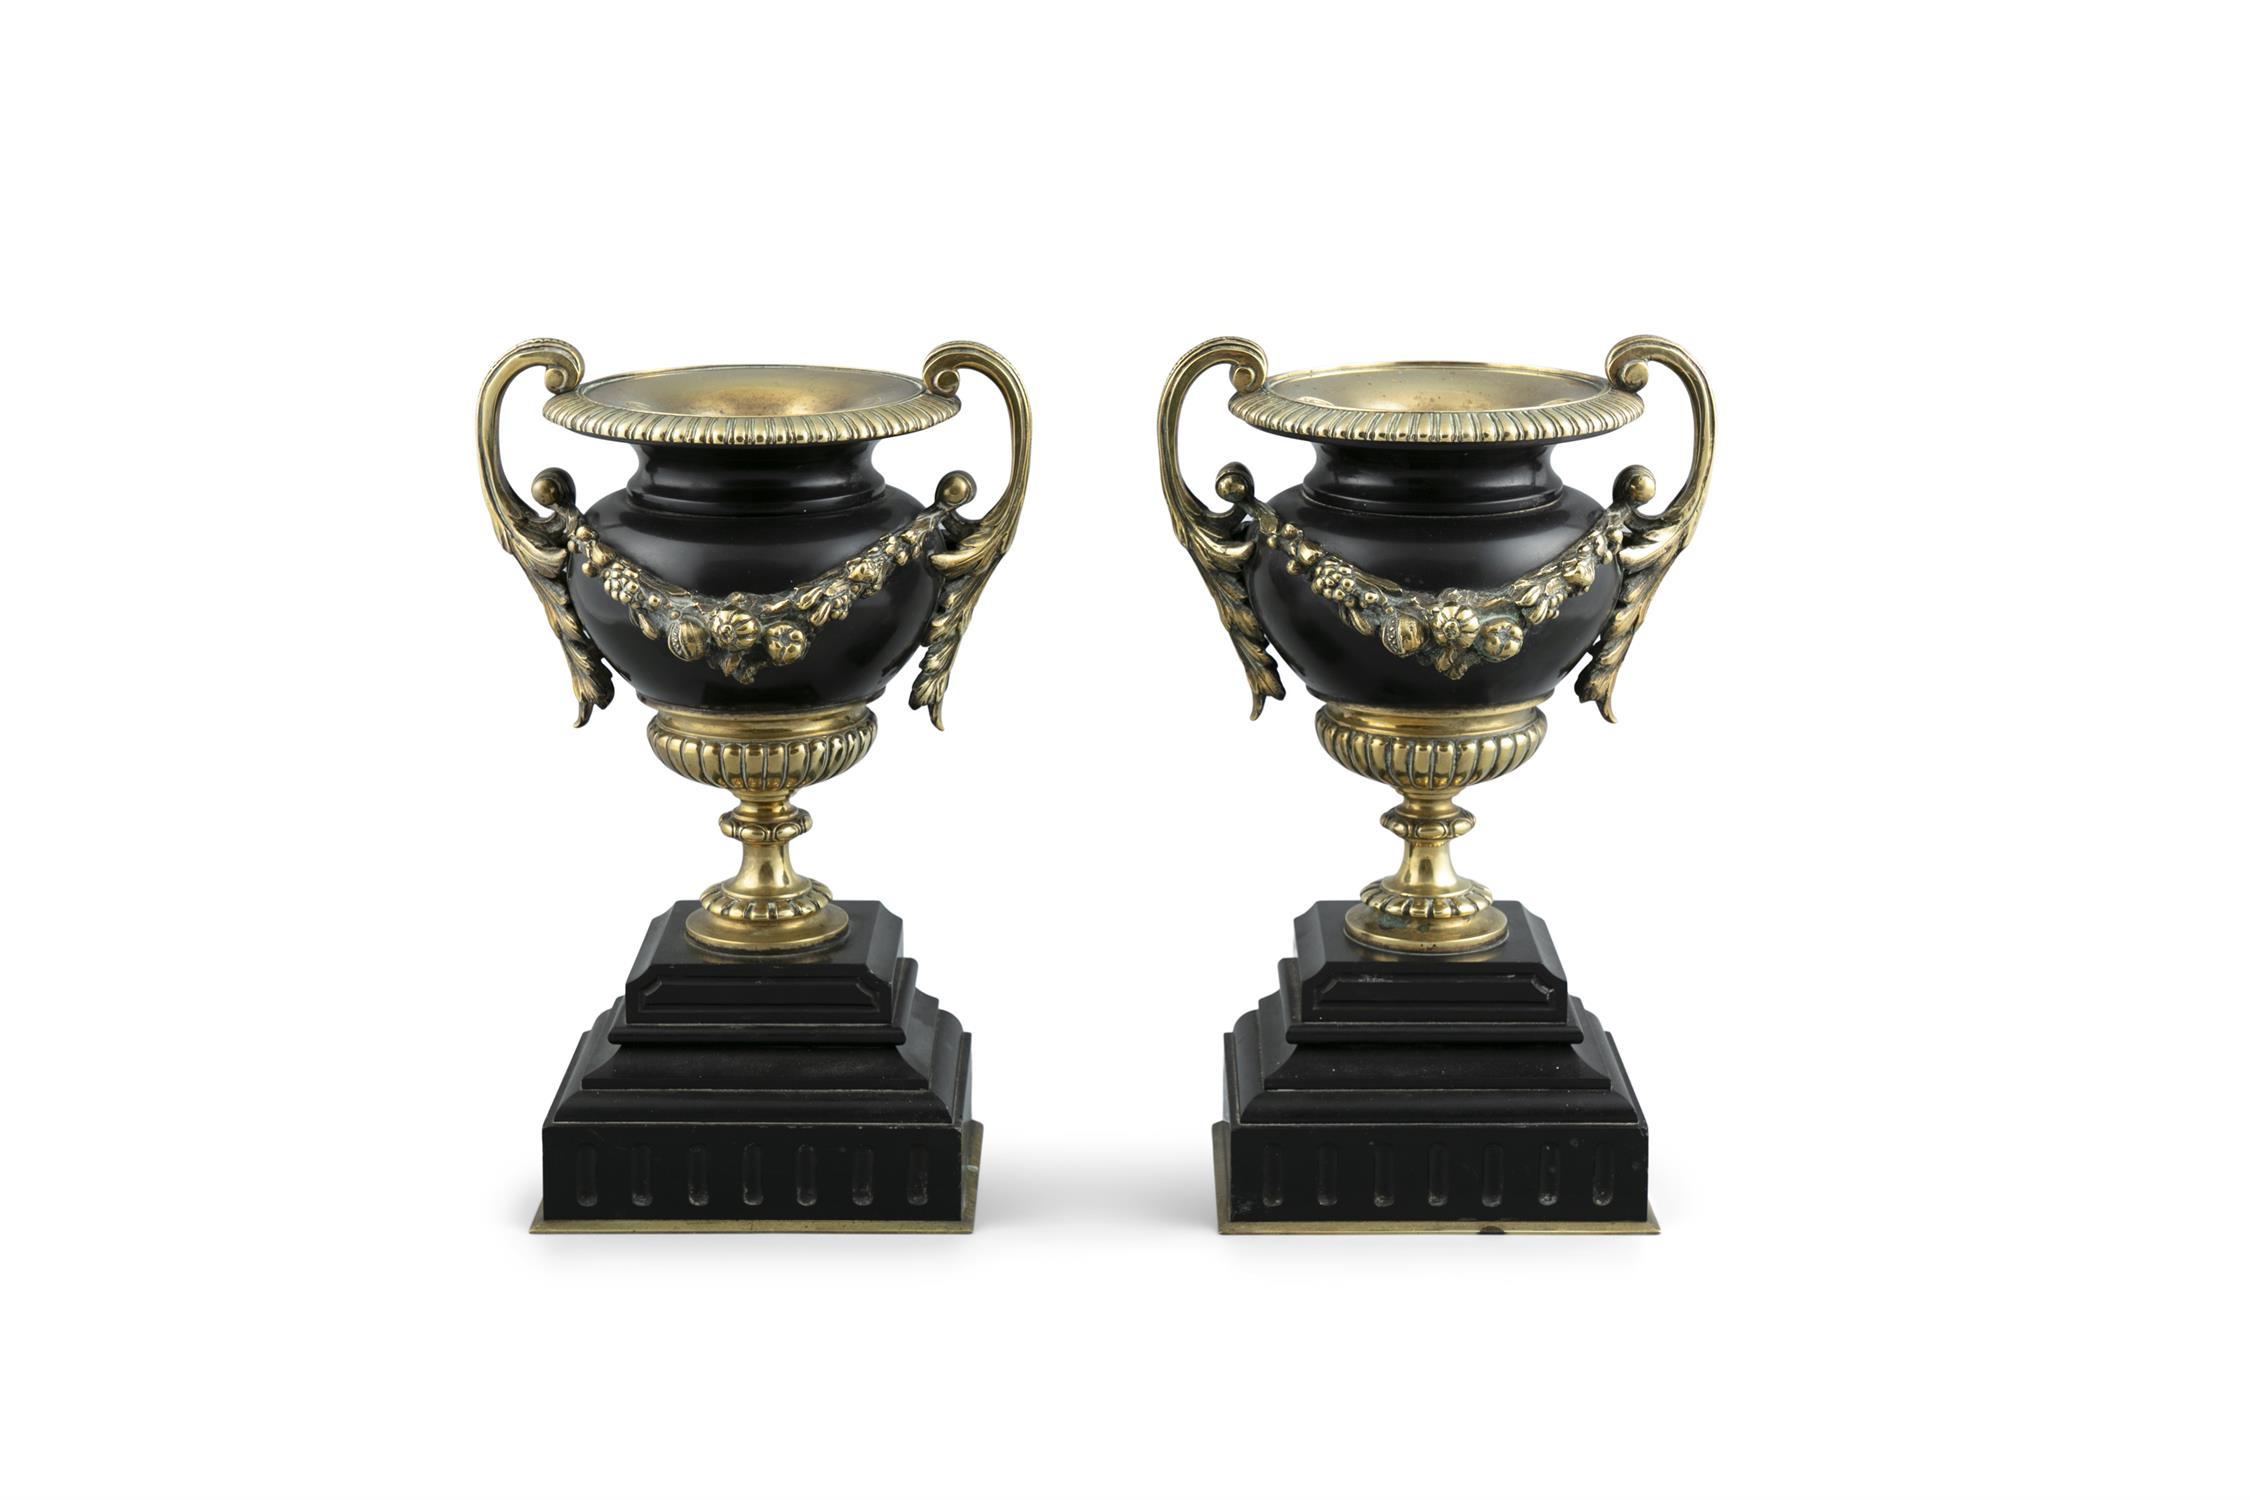 A PAIR OF FRENCH MARBLE AND GILT BRASS URNS, 19th century, of classical design, with acanthus scroll